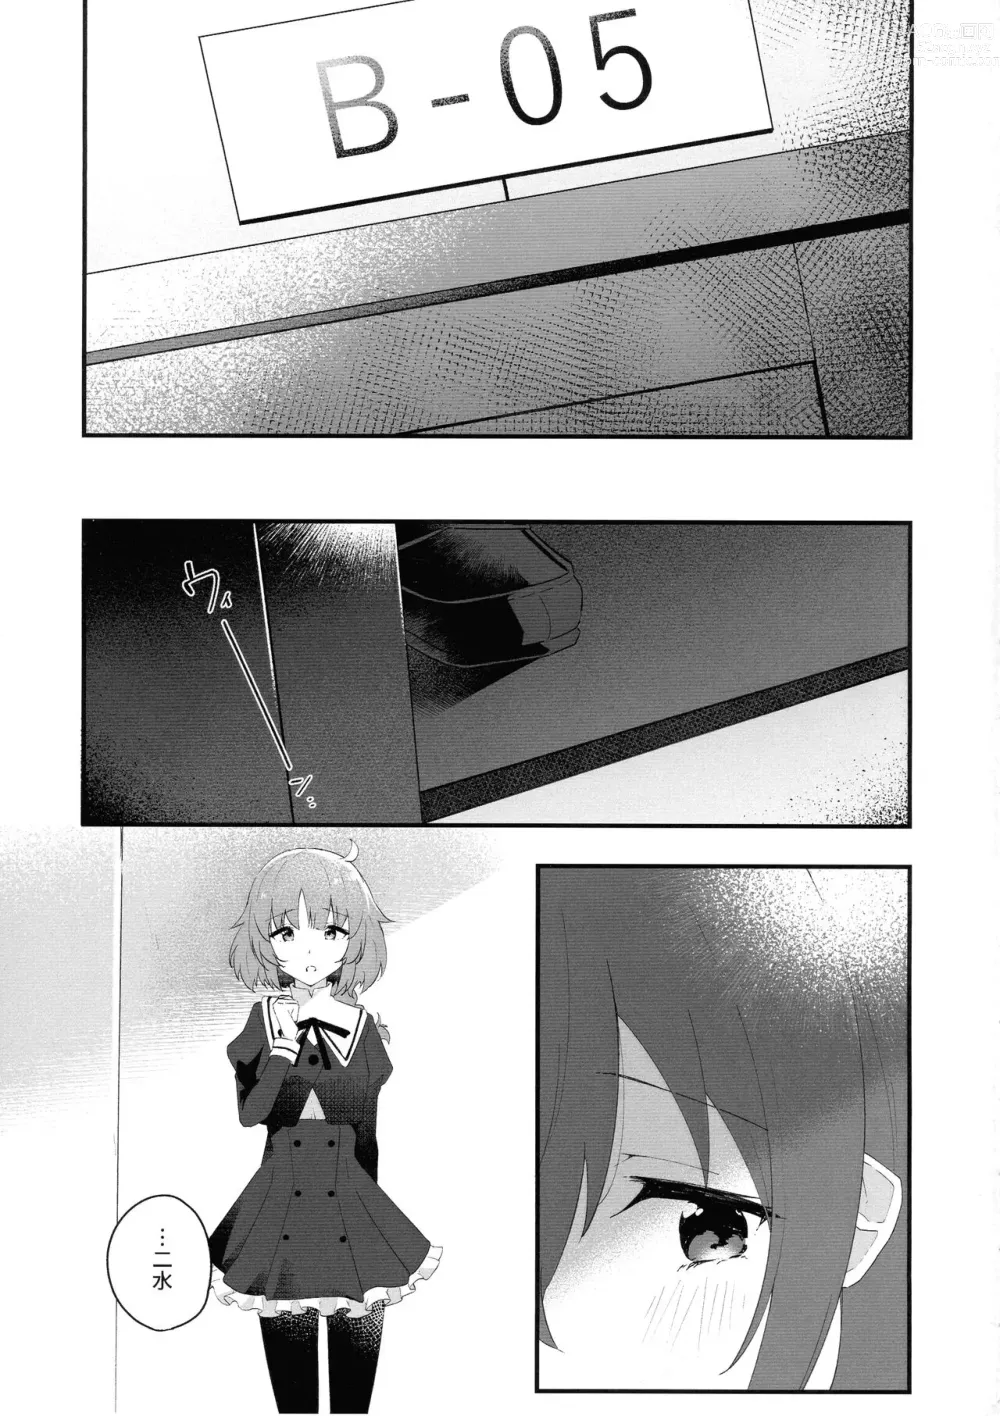 Page 2 of doujinshi Mabataki - without blink, could not find it